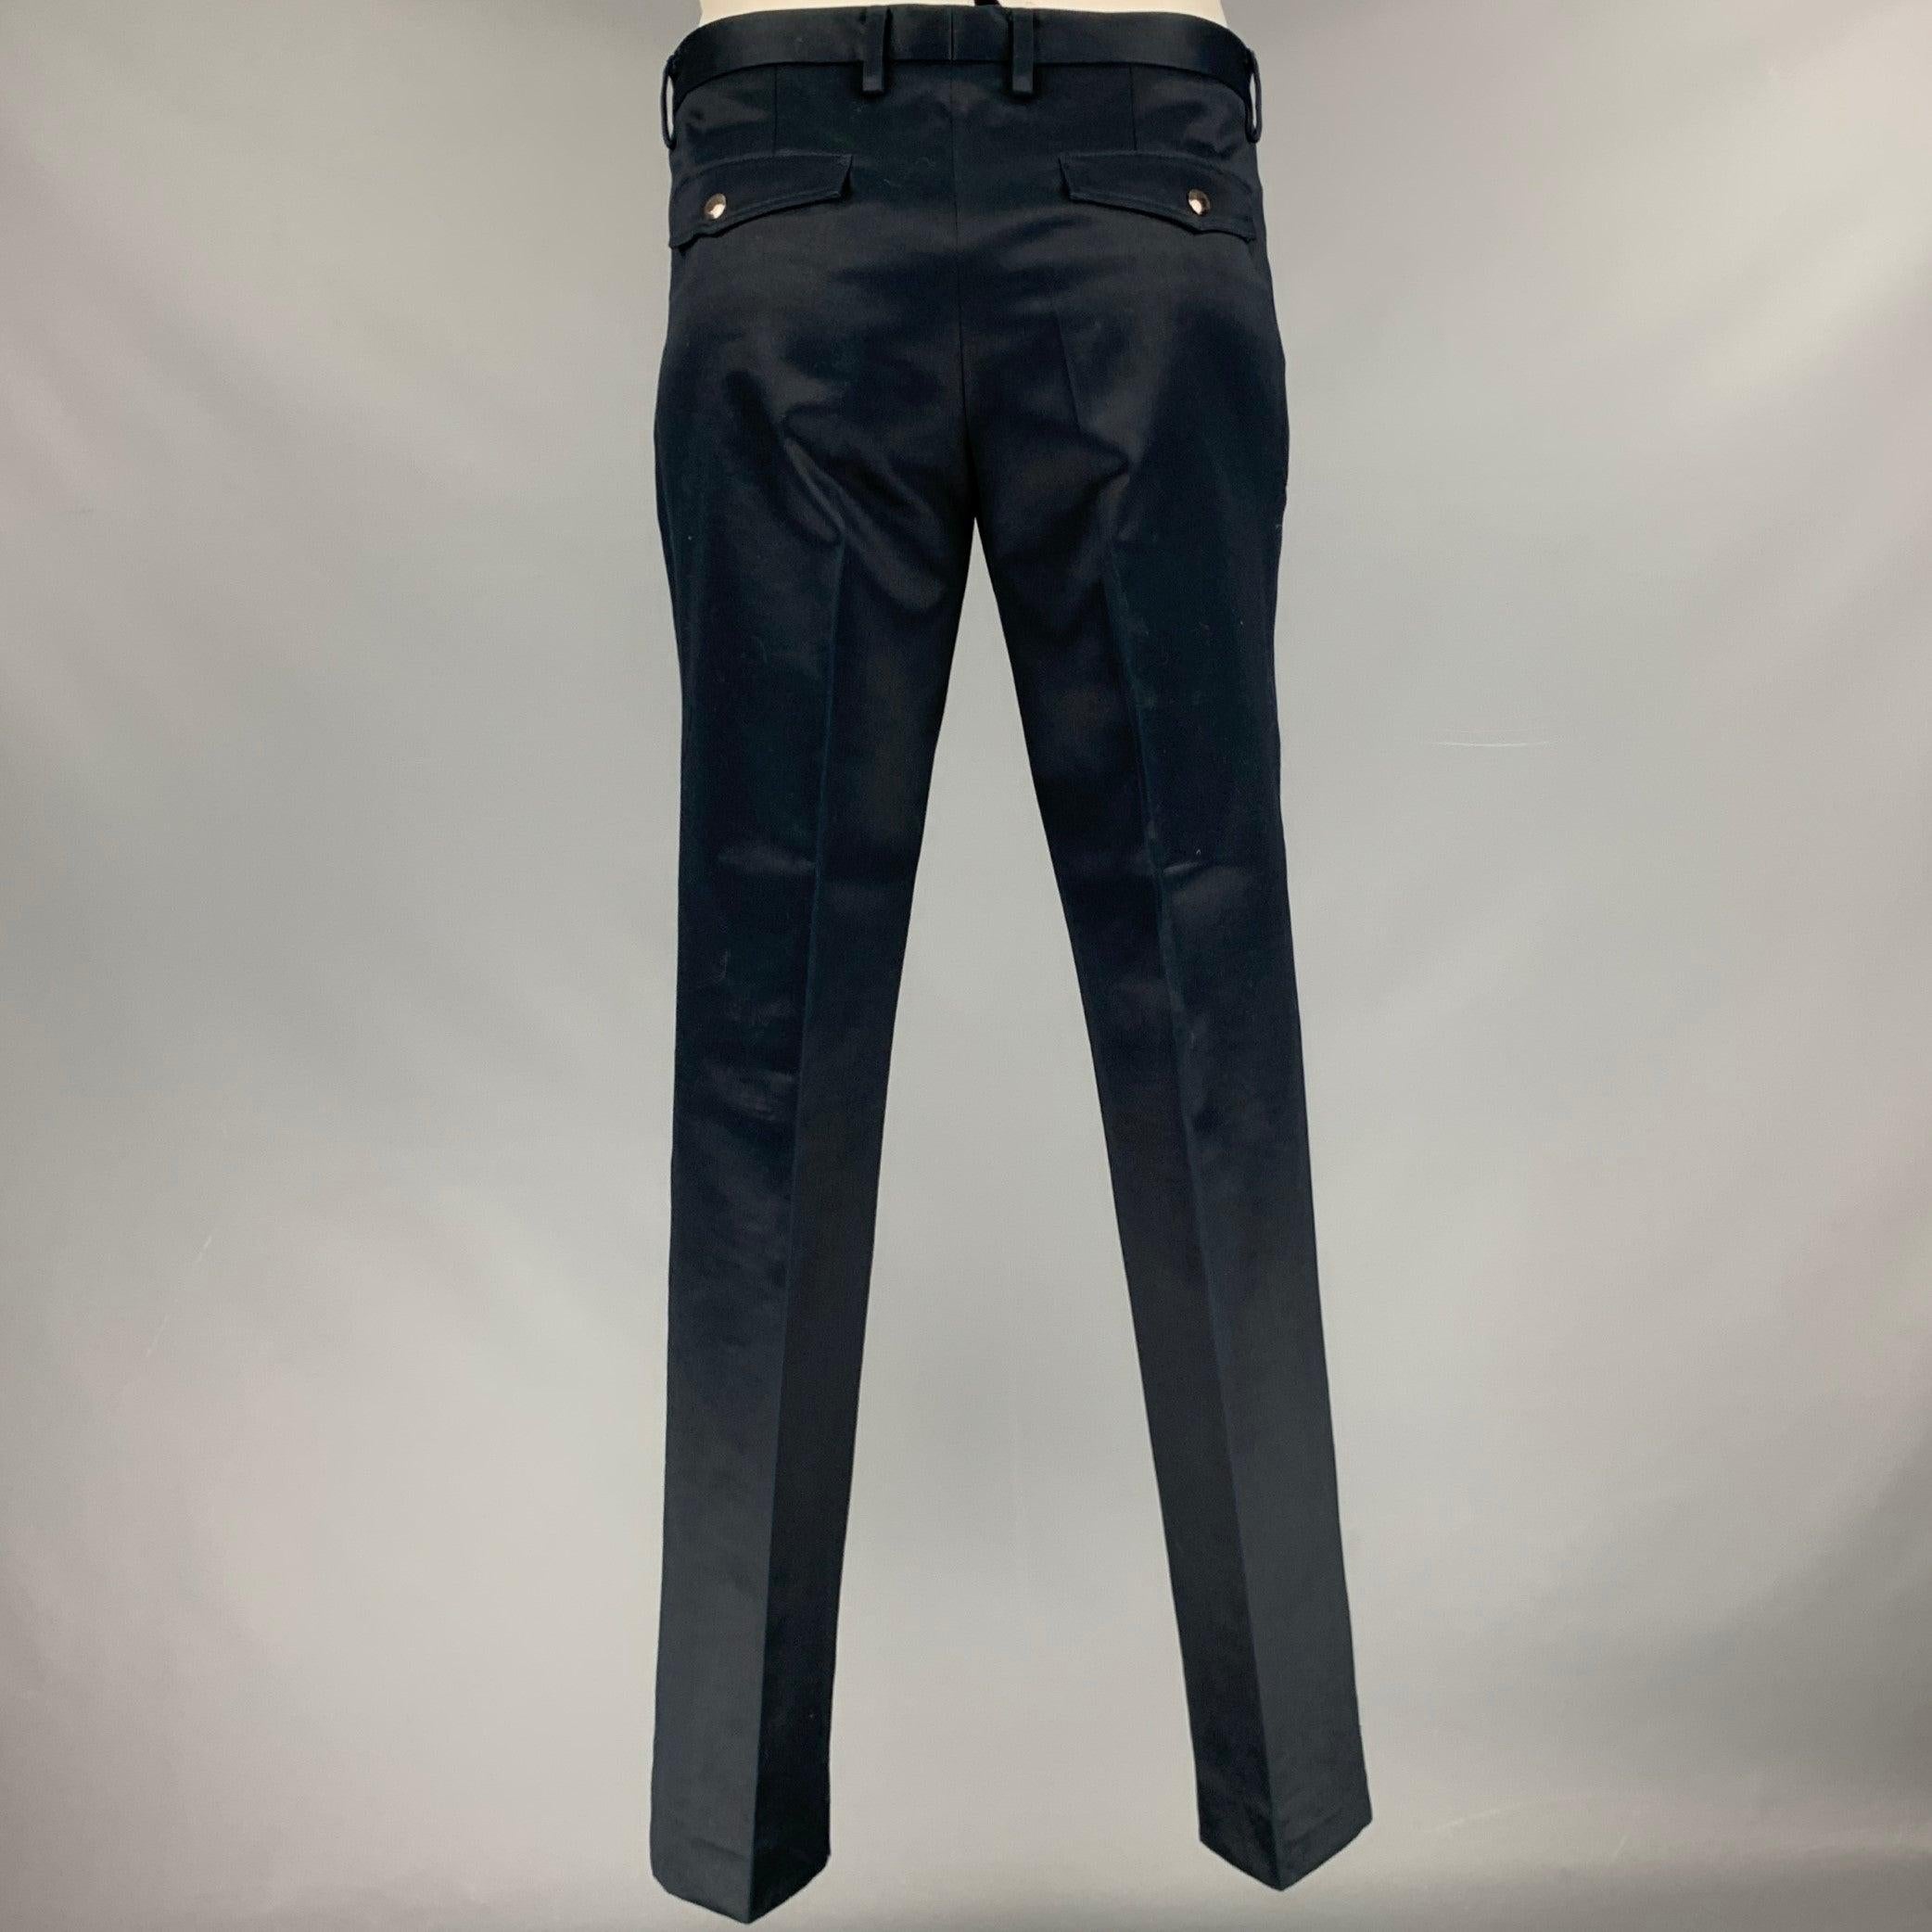 BELSTAFF Size 34 Black Cotton Flap Pockets Dress Pants In Good Condition For Sale In San Francisco, CA